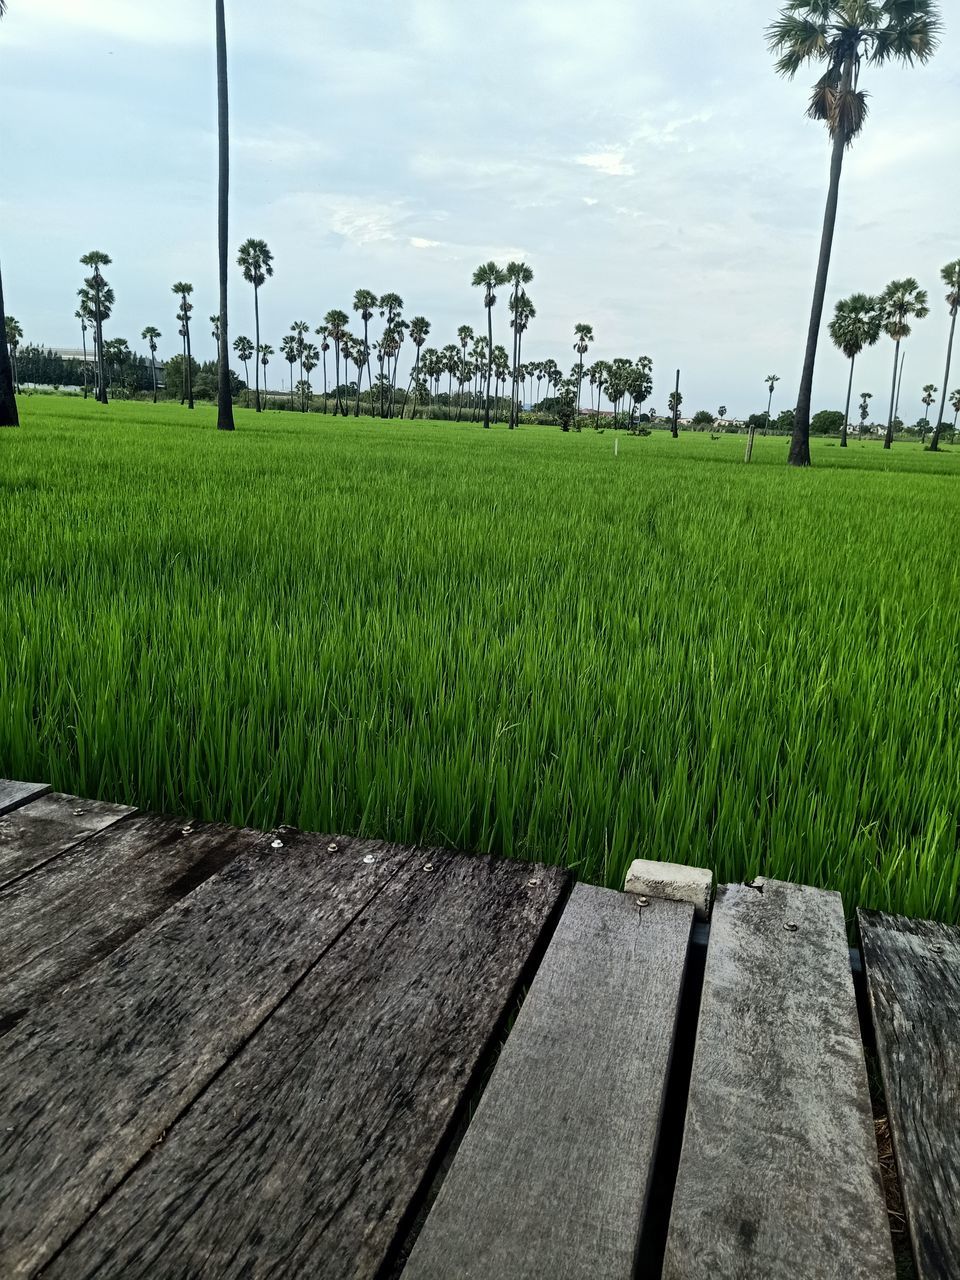 plant, grass, agriculture, paddy field, sky, landscape, field, green, nature, land, rural scene, environment, cloud, tree, rural area, crop, soil, growth, farm, beauty in nature, scenics - nature, no people, rice paddy, outdoors, day, tranquility, rice, wood, tropical climate, wheatgrass, tranquil scene, lawn, palm tree, food and drink, cereal plant, walkway, horizon, food, environmental conservation, plantation